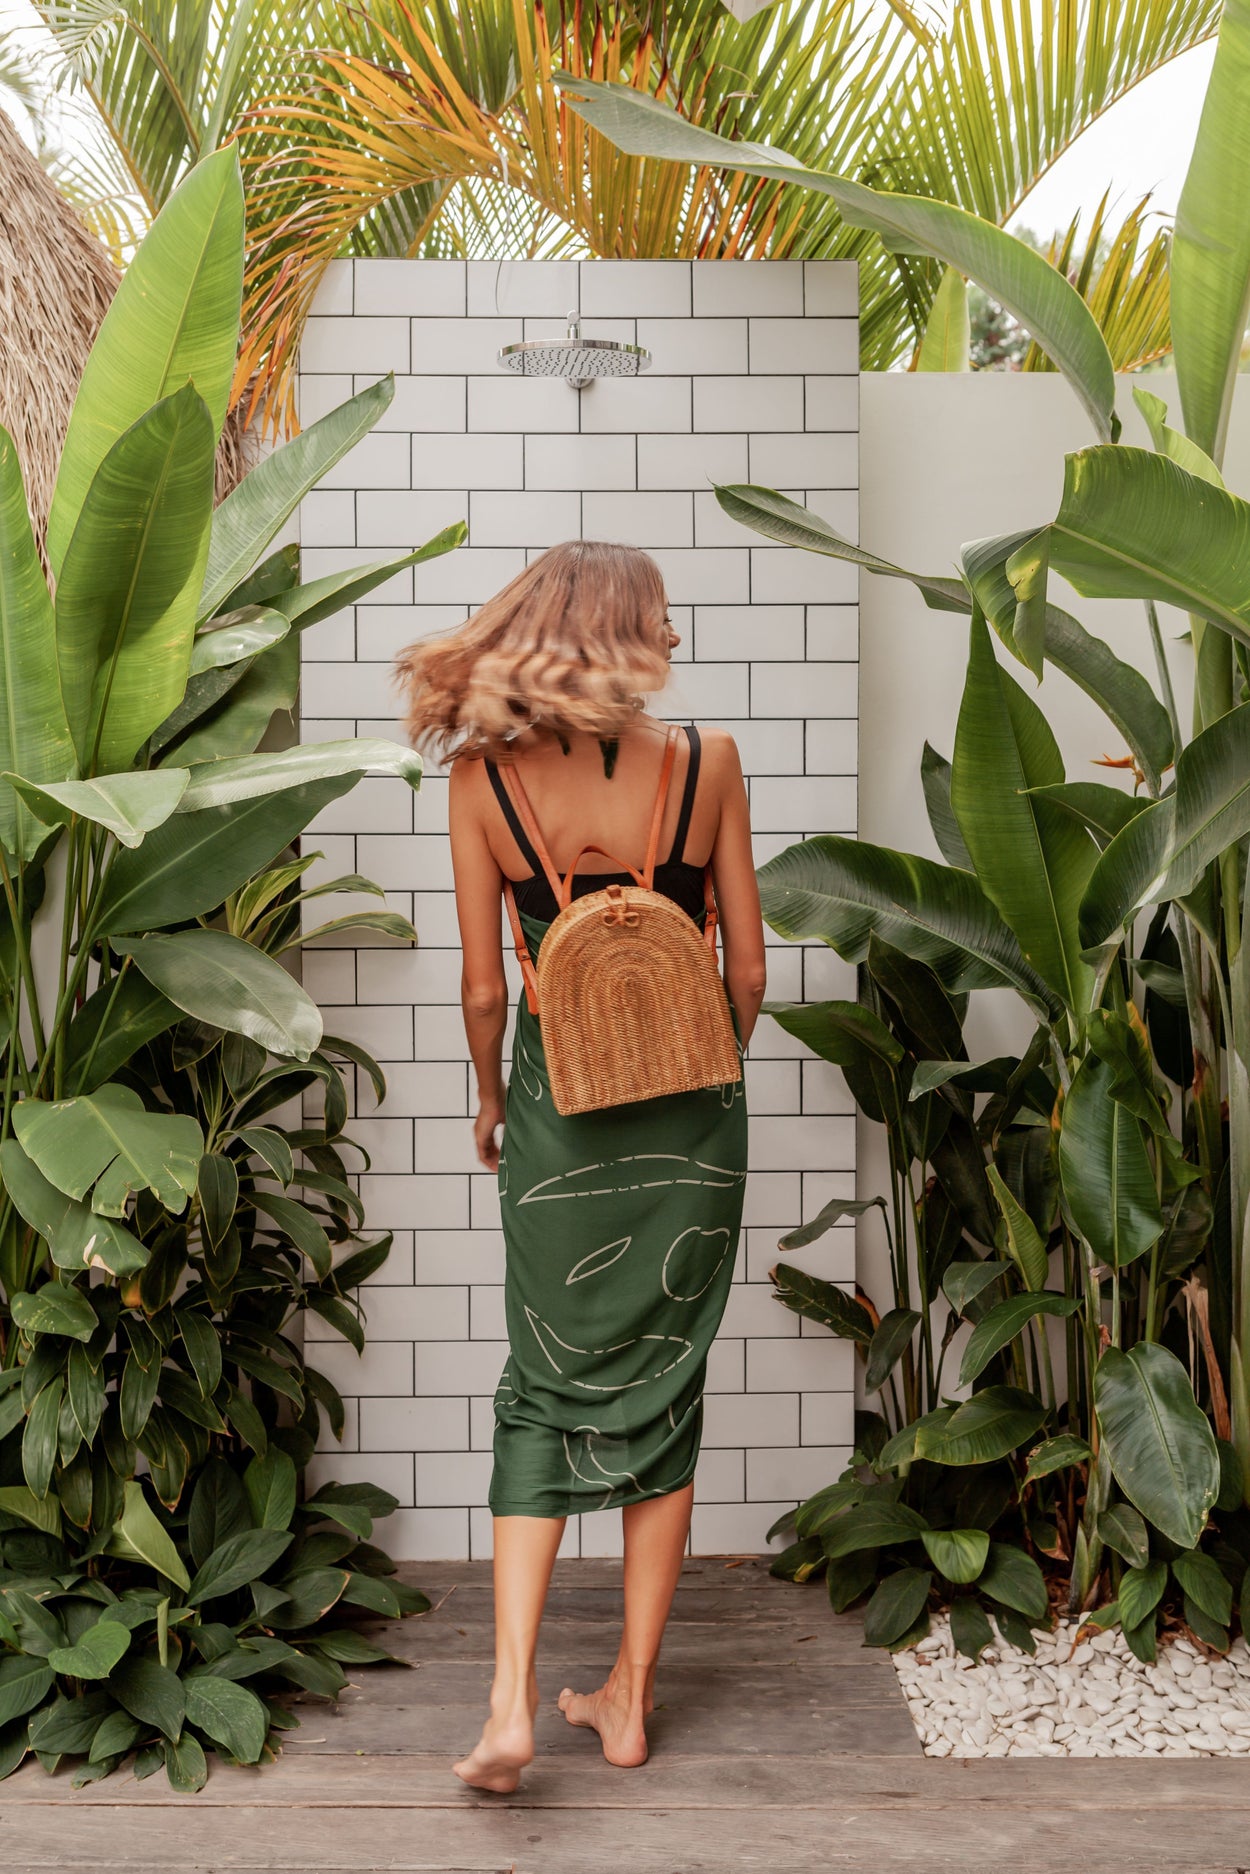 Imperfect Rattan Backpacks